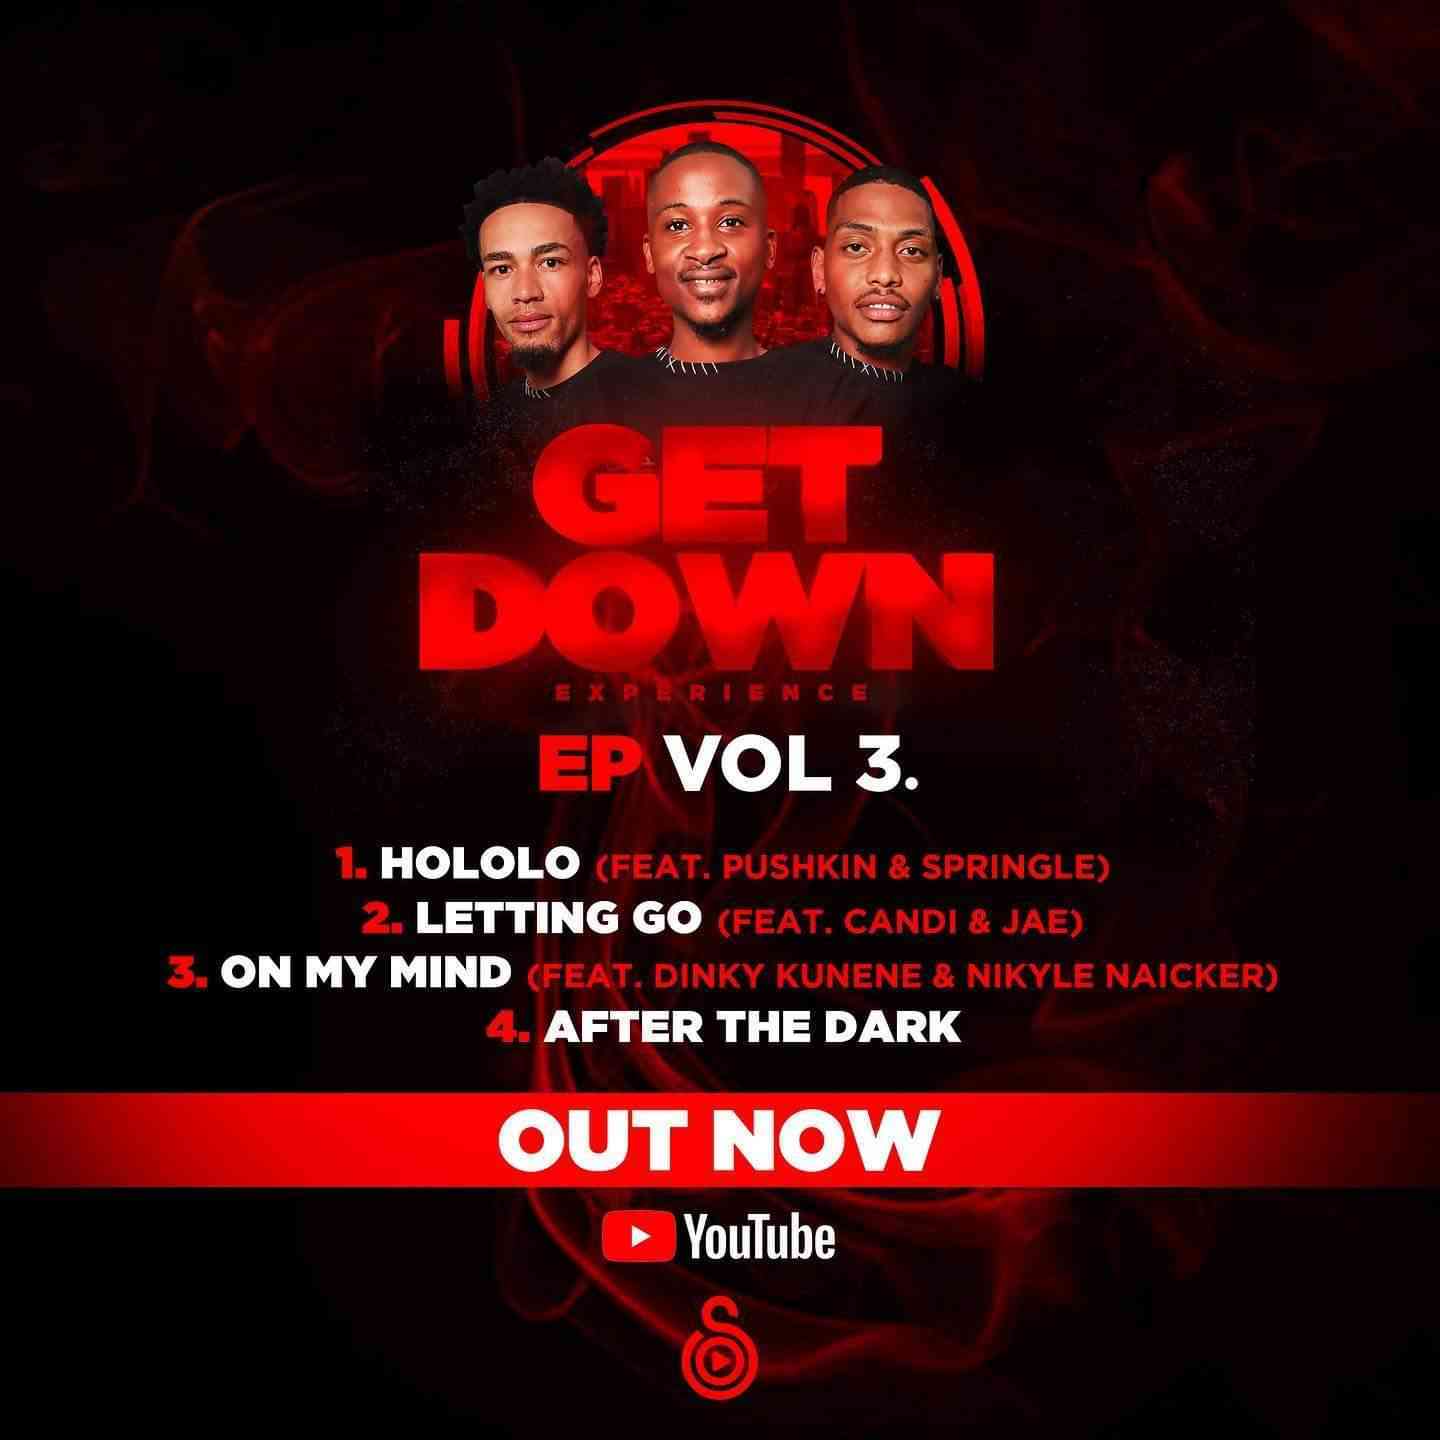 The Squad Get Down Experience EP Vol. 3